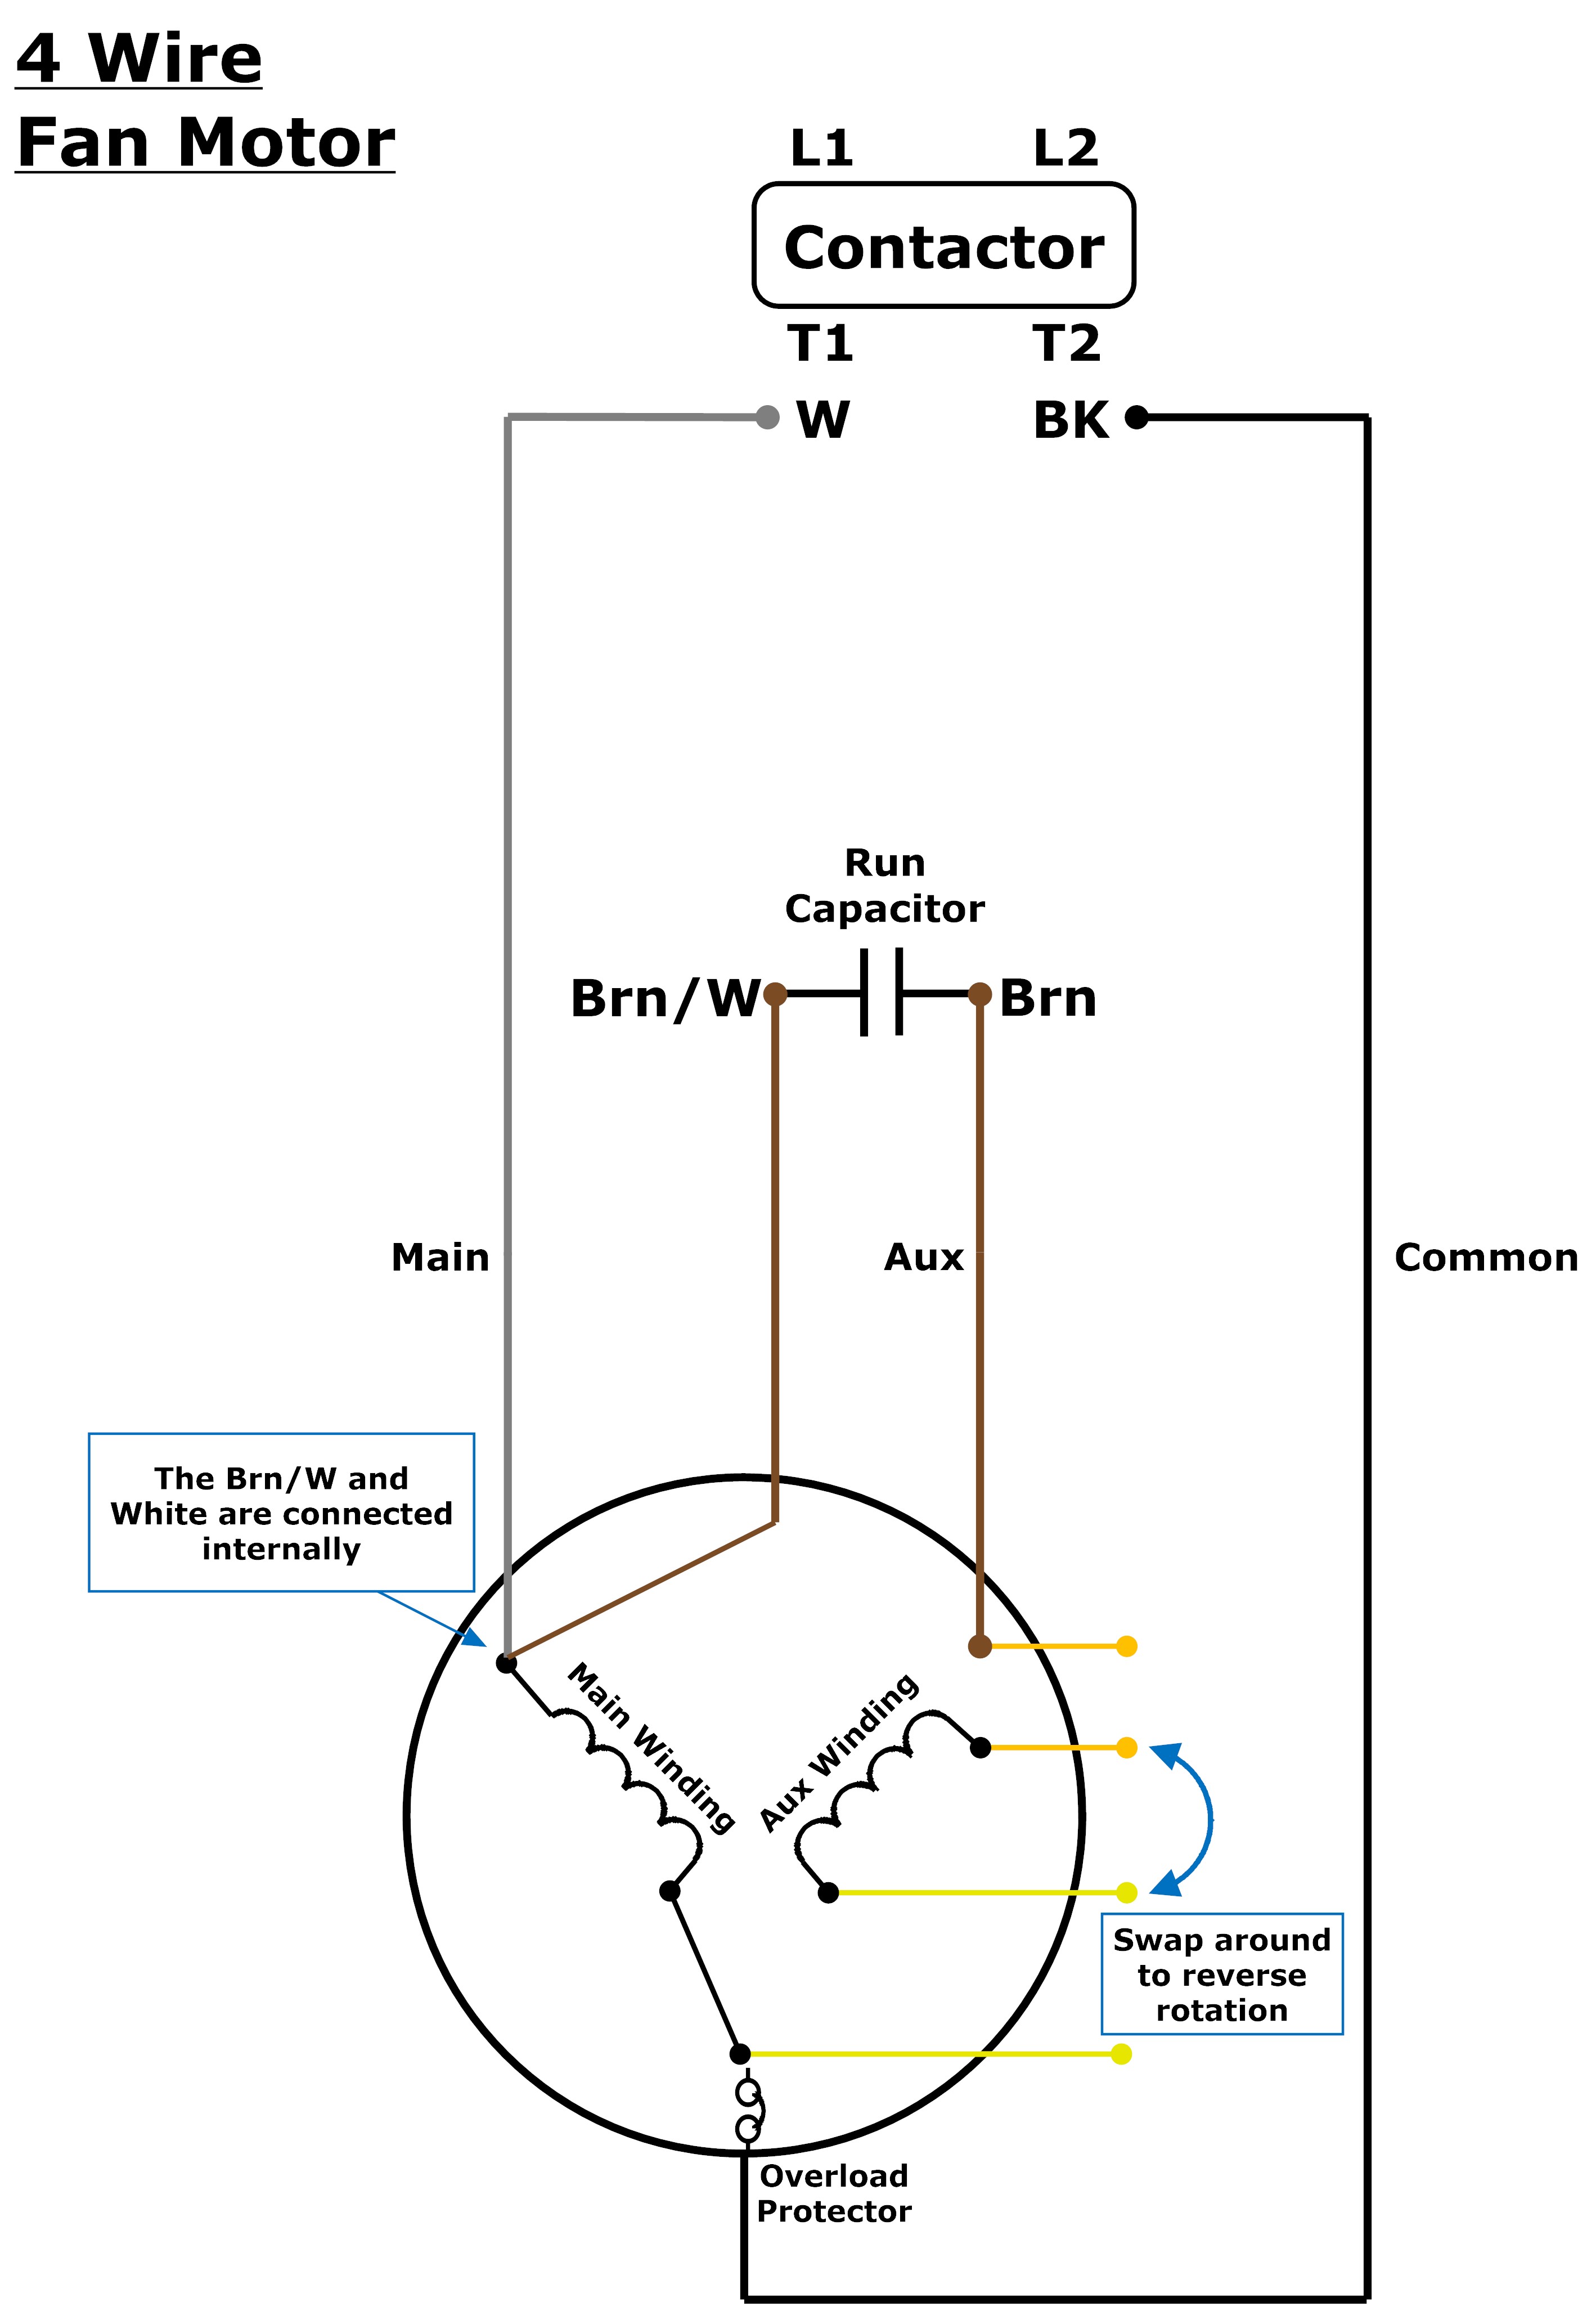 3 or 4 Wire? Condenser Fan Motor Wiring – Johnstone Supply Support  Wiring Diagrams For A Basic 4 Wire Motor    Johnstone Supply Support